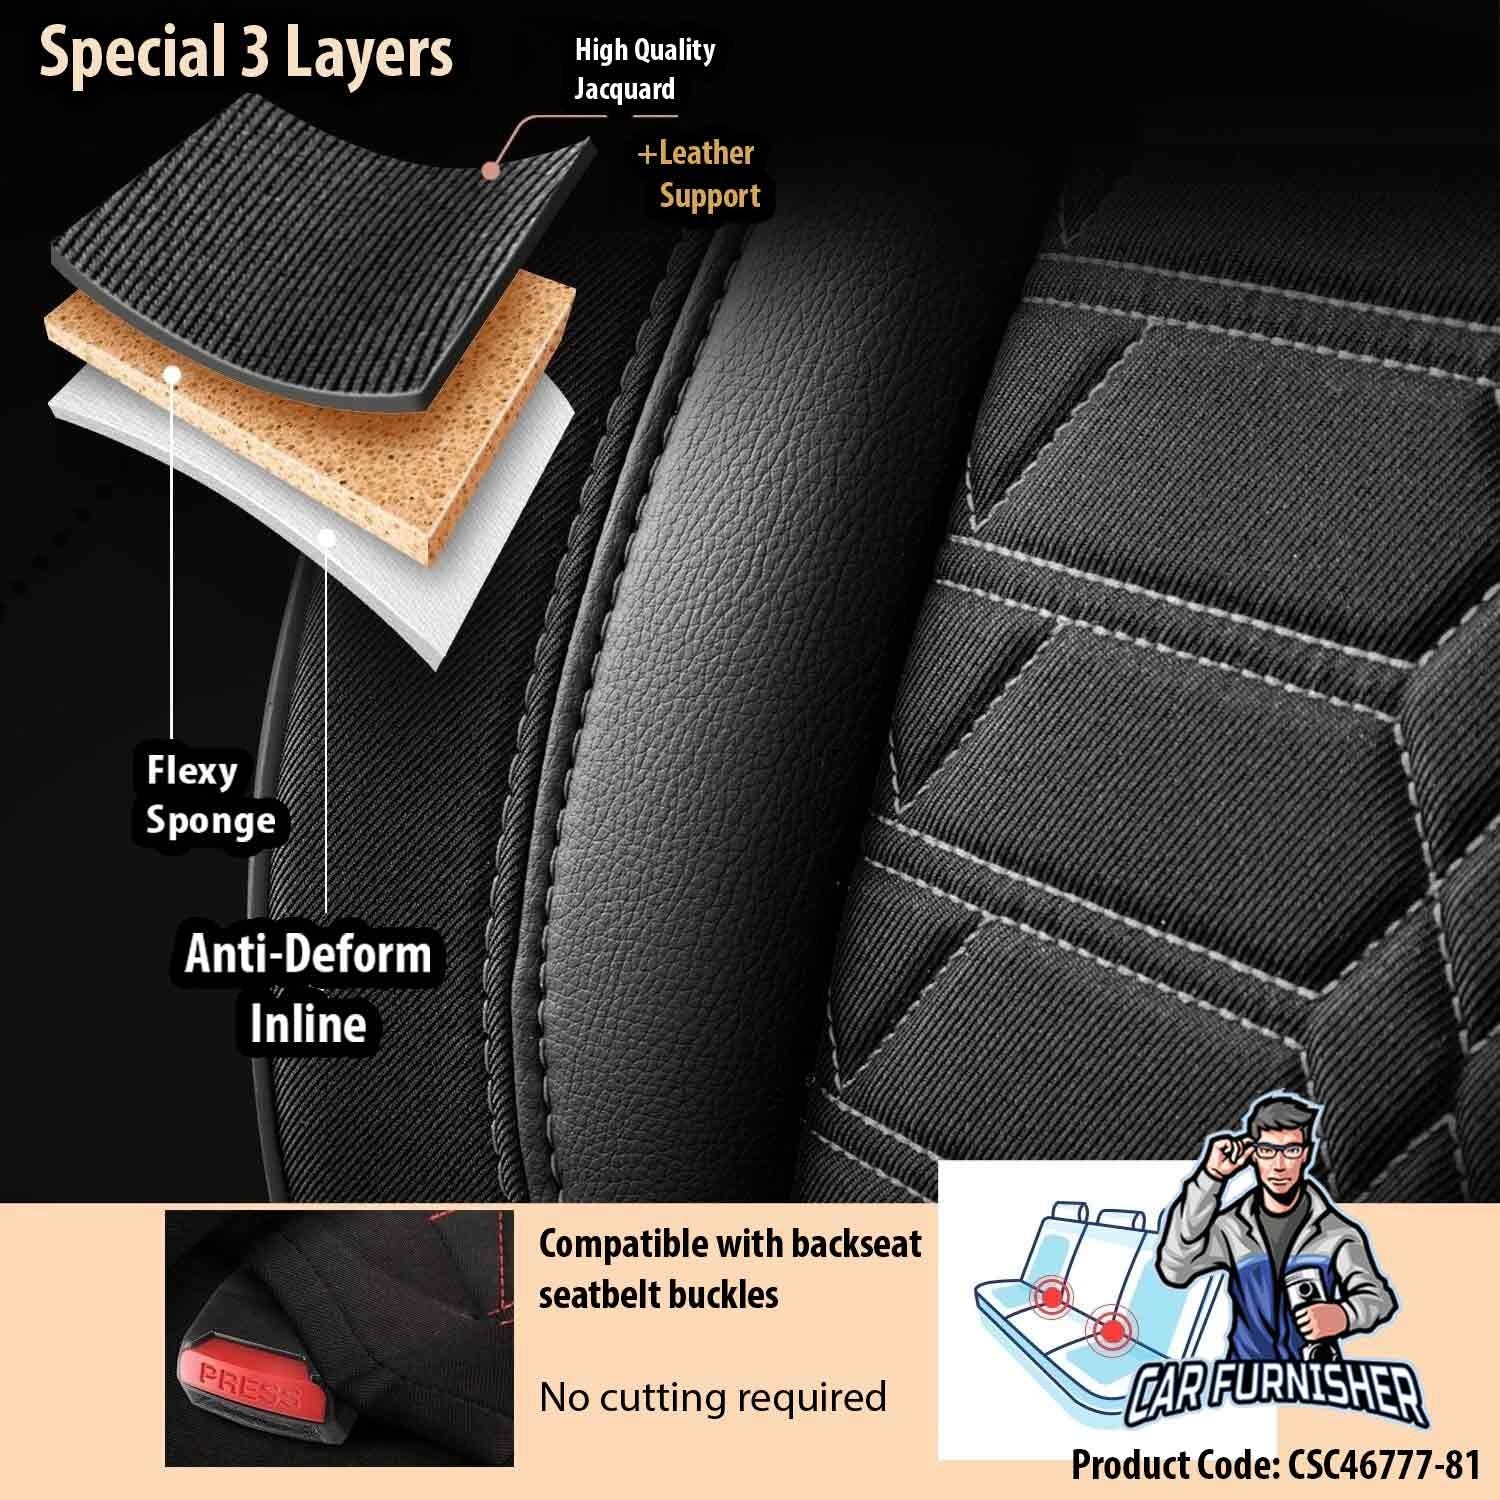 Luxury Car Seat Cover Set (5 Colors) | Venetian Series Black Style A Leather & Fabric